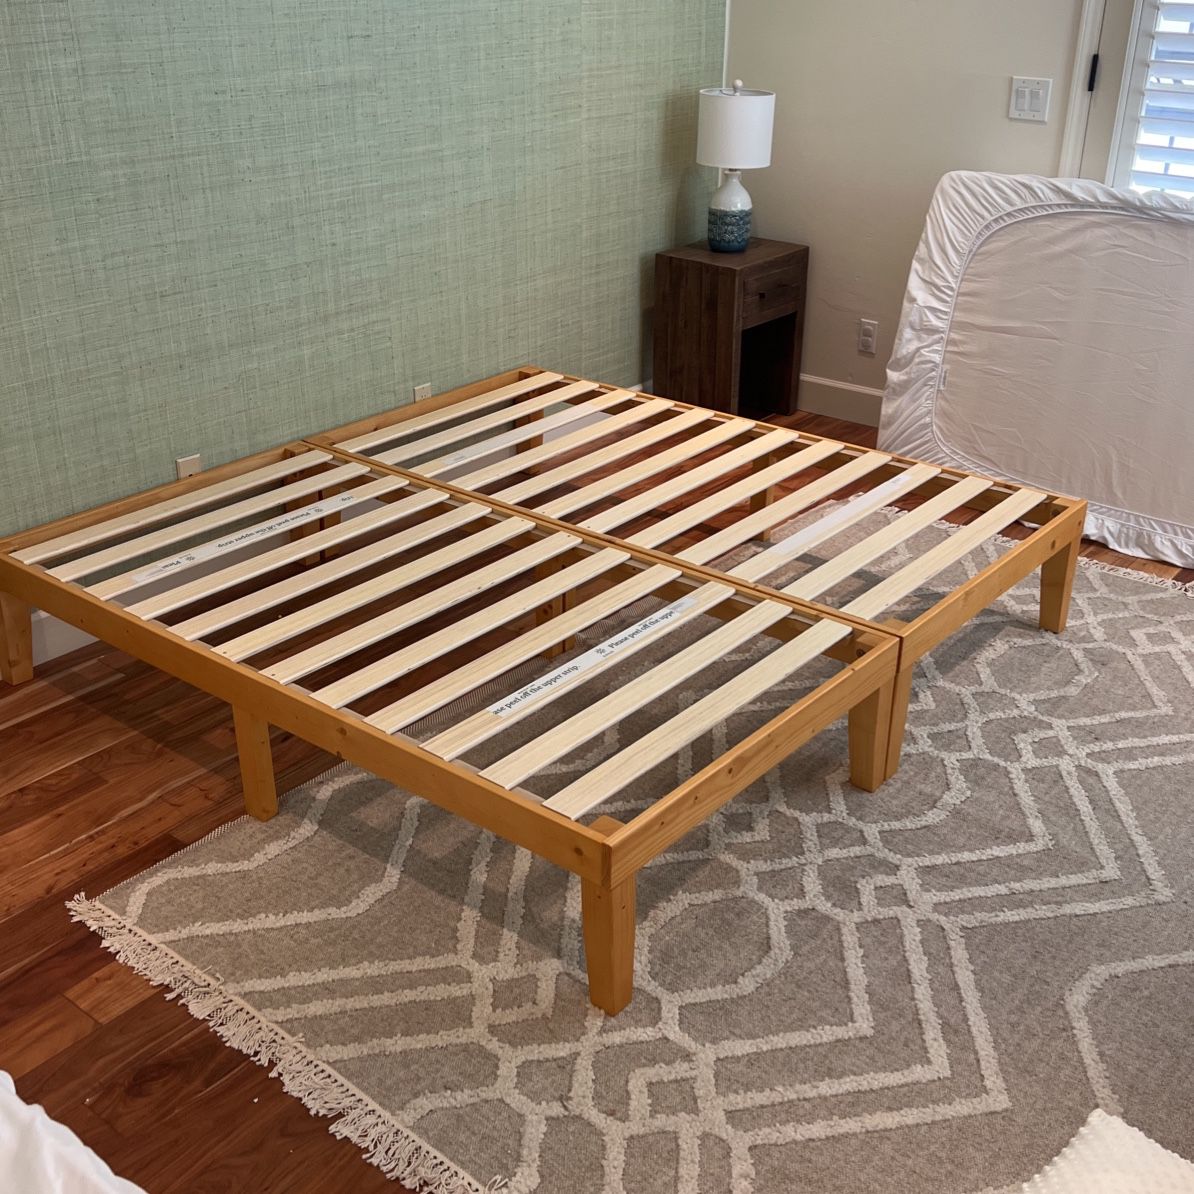 2 Twin bed Frames And 2 Twin Mattresses (Save Over $300)